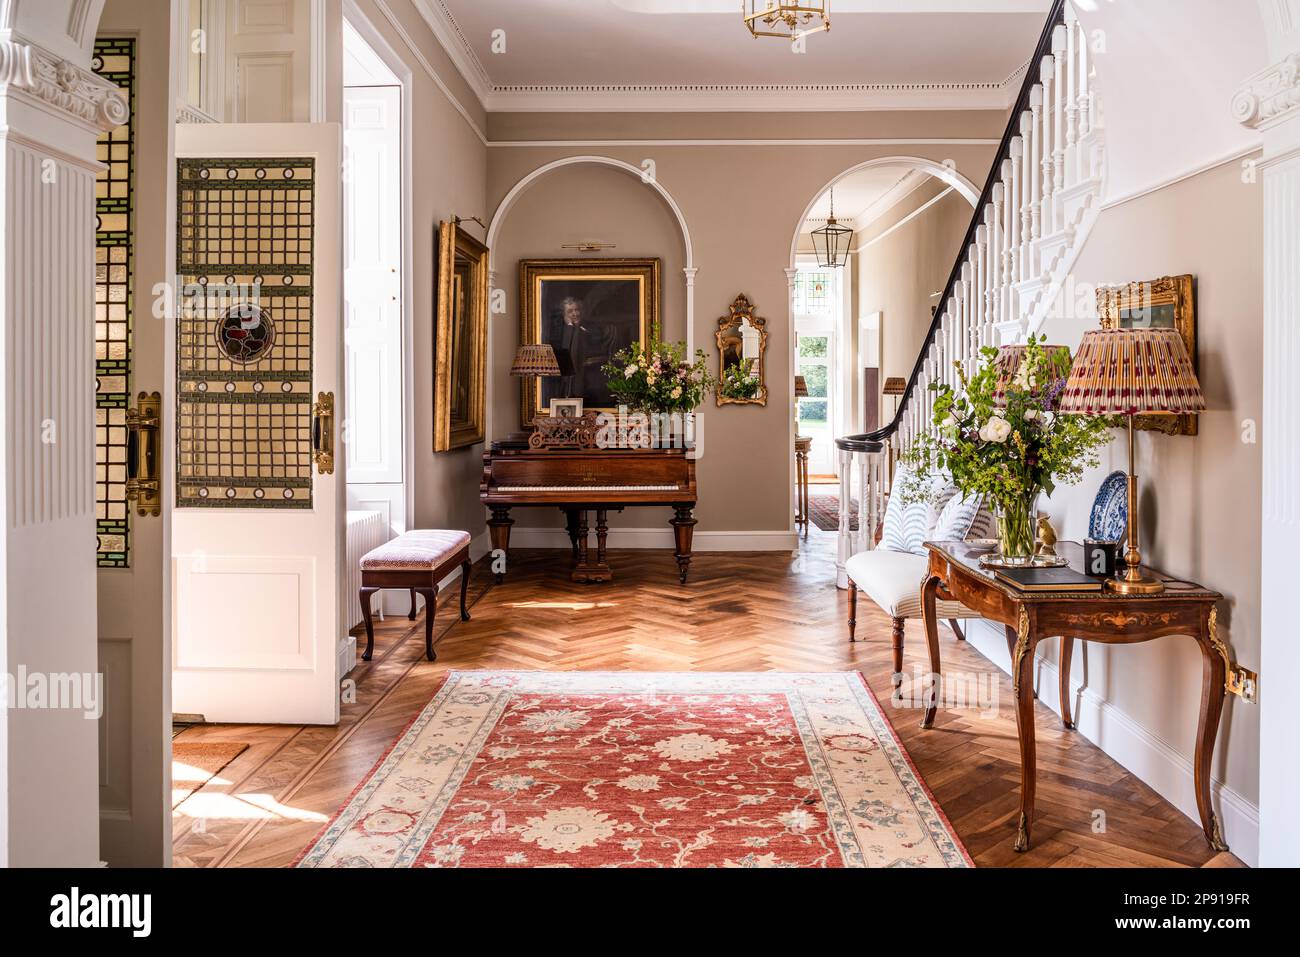 Spacious hallway entrance to renovated 18th century Grade II listed Suffolk country house, UK Stock Photo